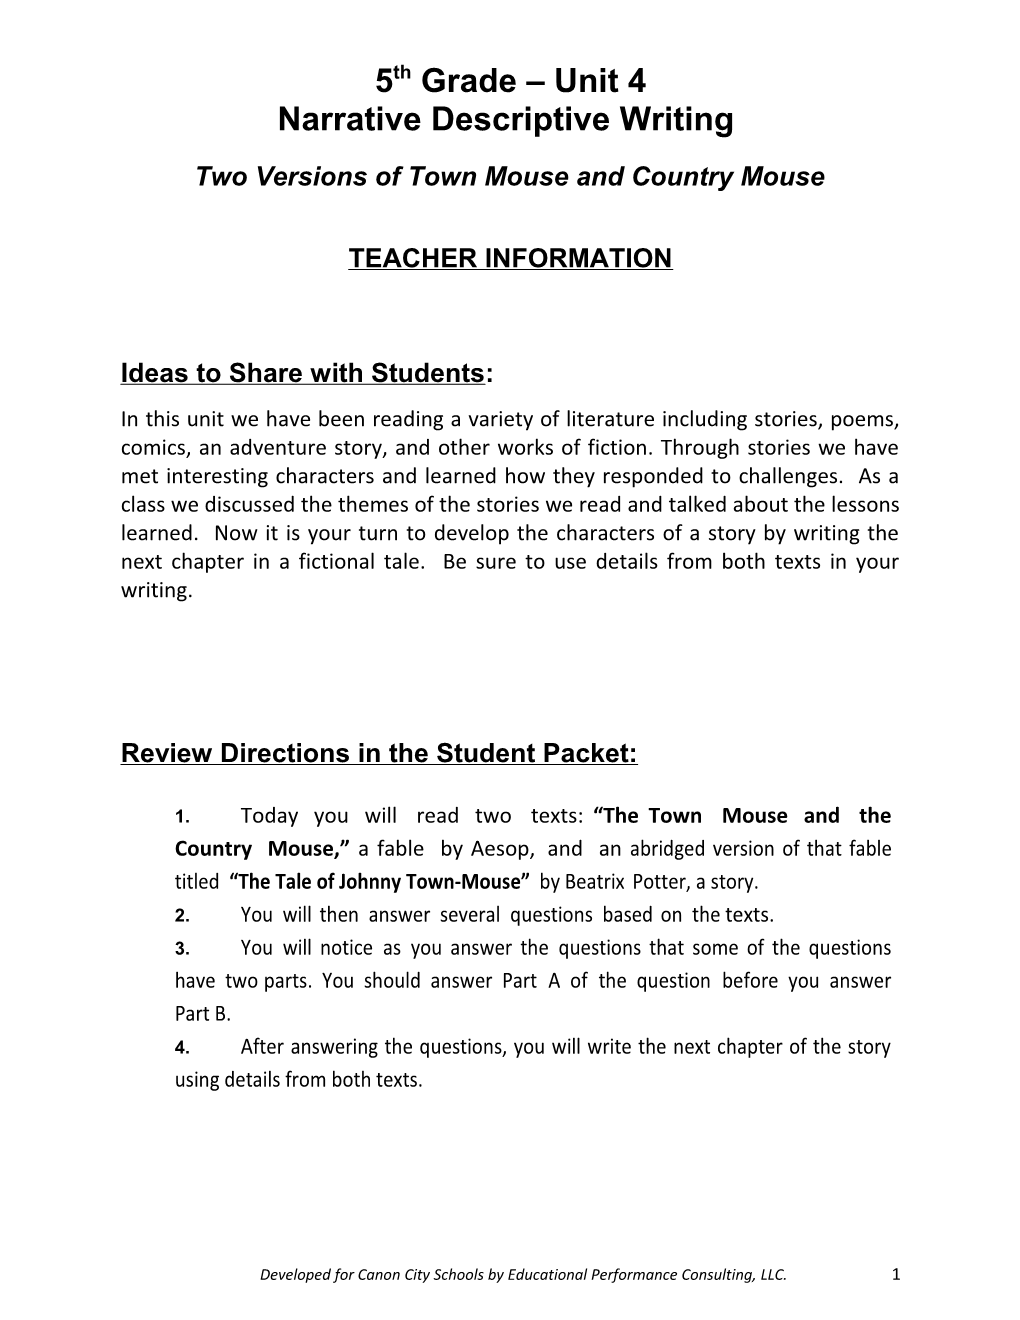 Two Versions of Town Mouse and Country Mouse